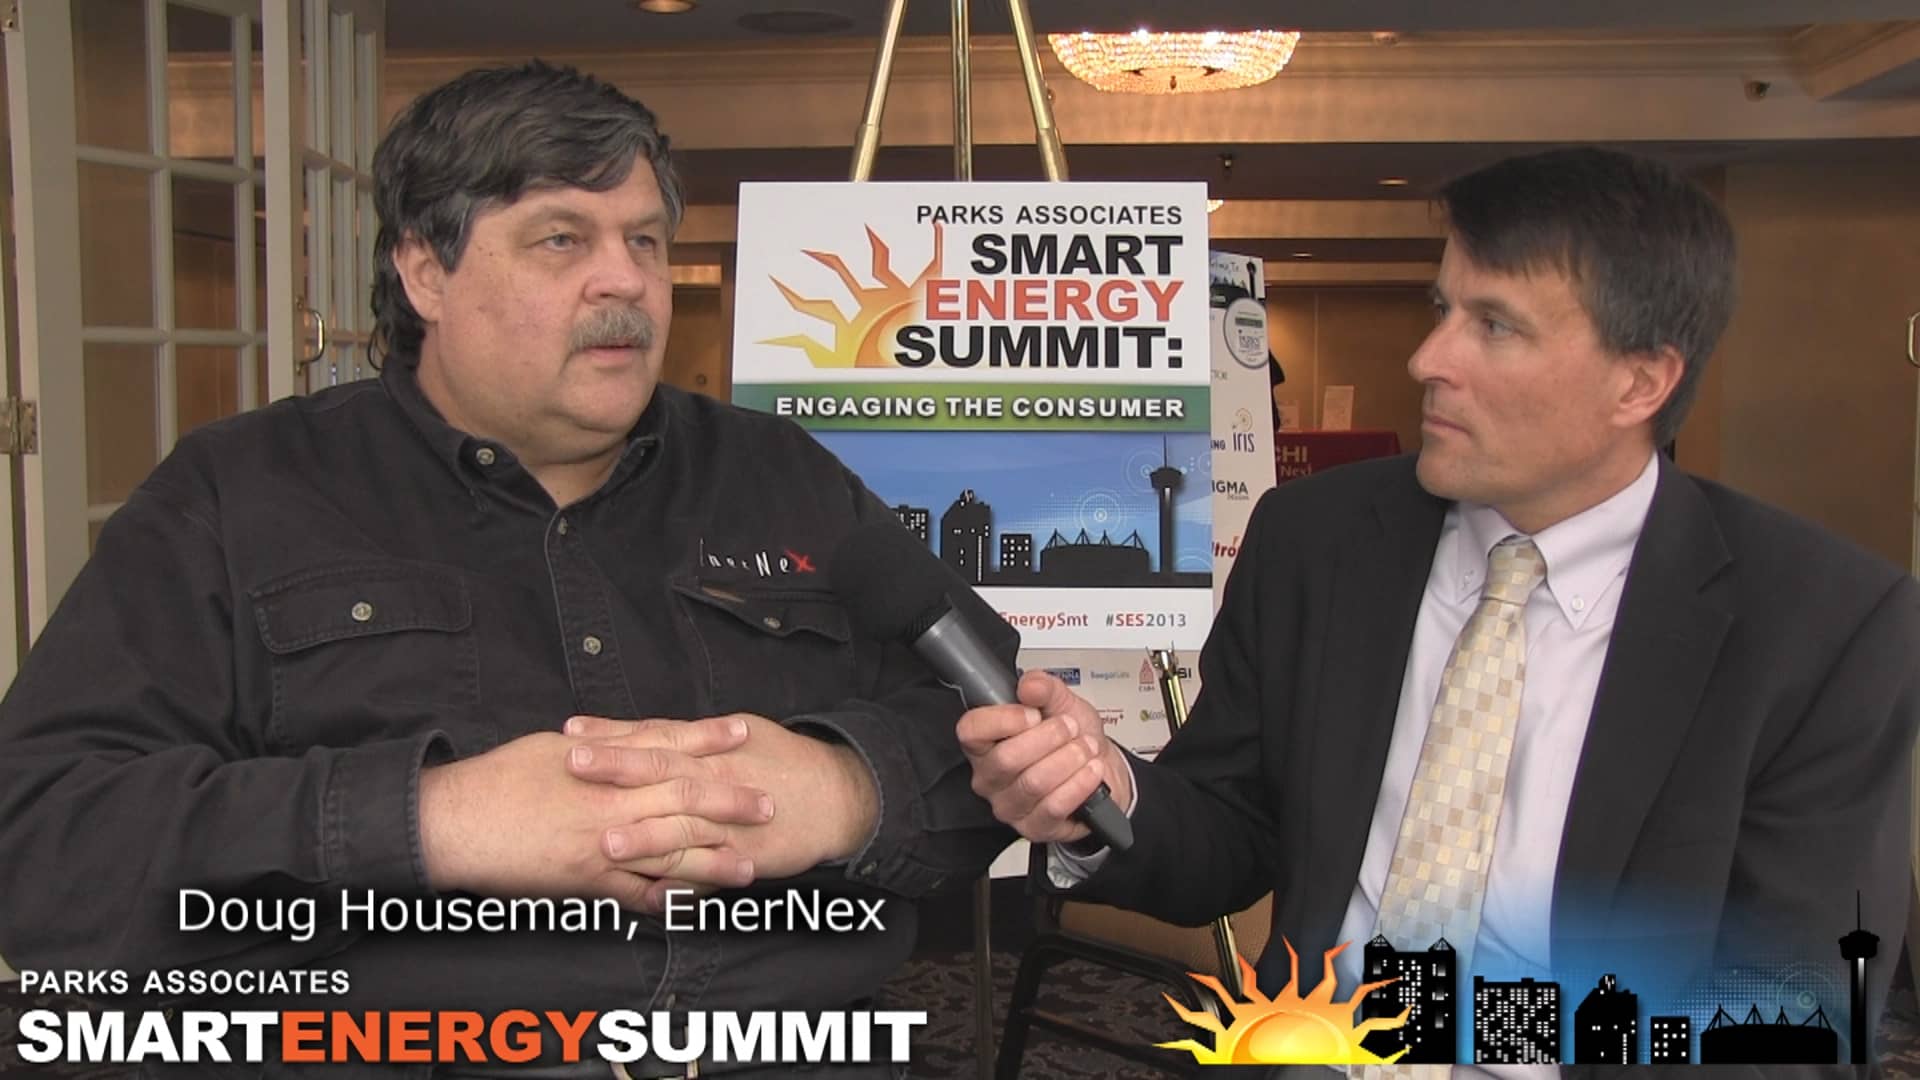 Doug Houseman of EnerNex talks to Ken Pyle about Smart Profile 2.0 in an interview filmed at the Smart Energy Summit.